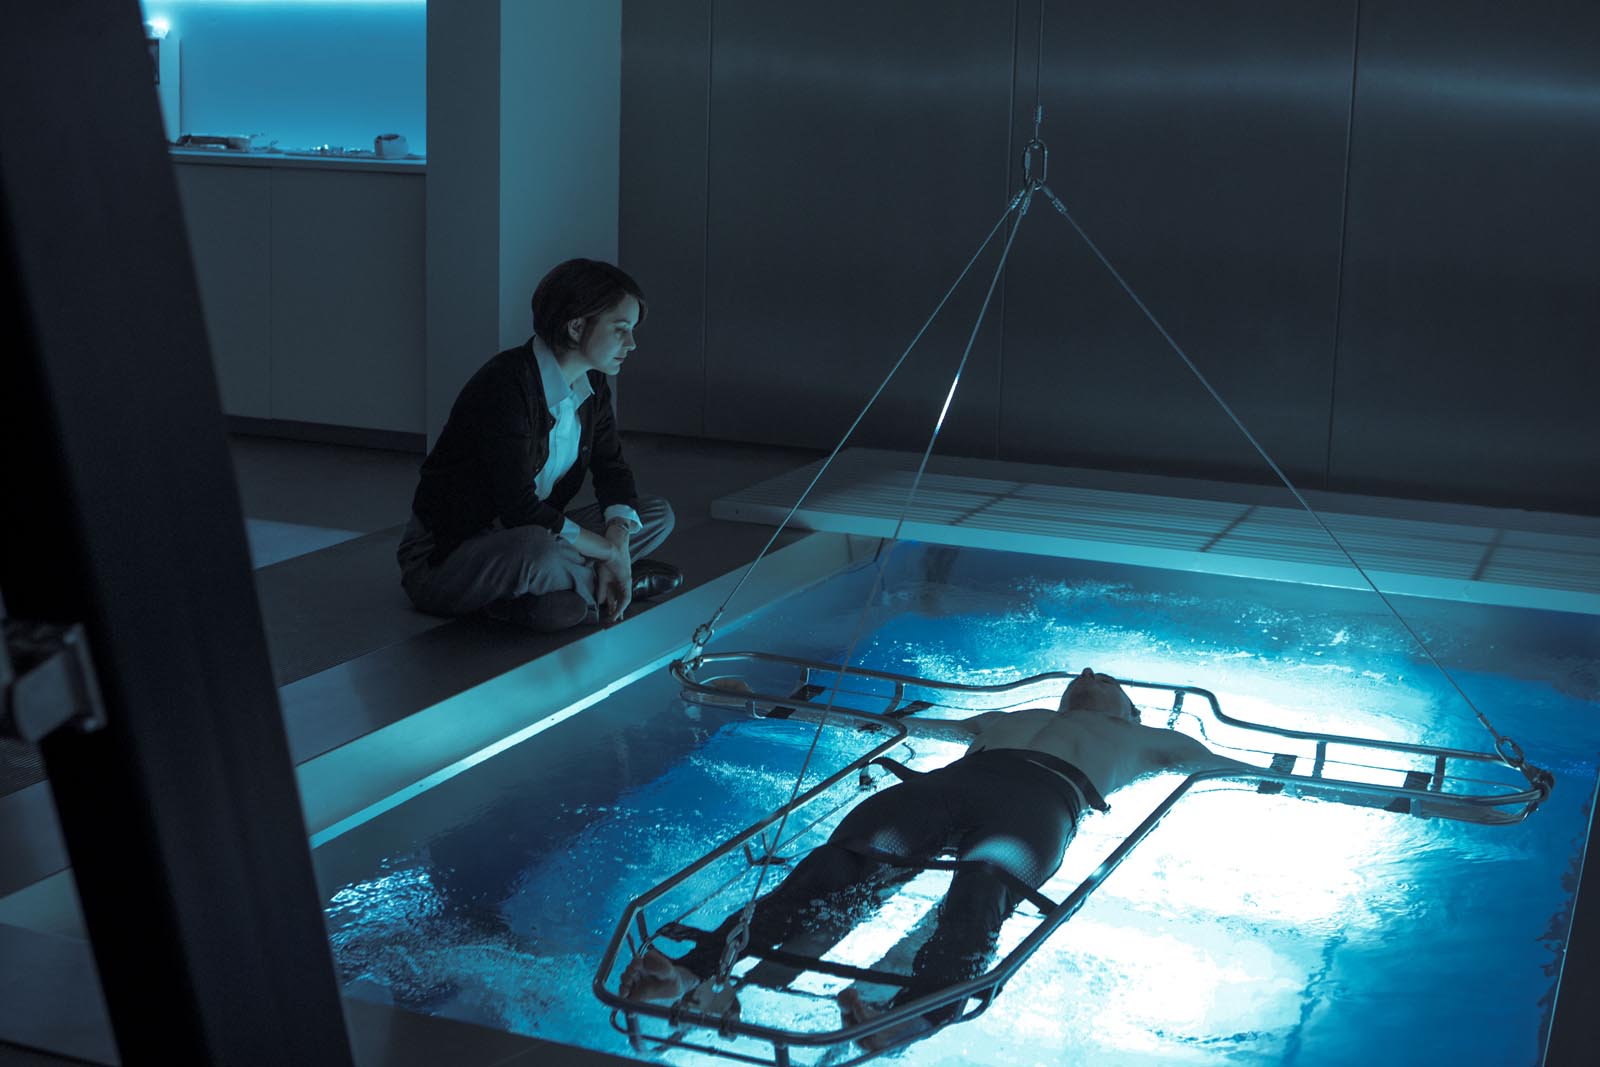 assassins creed fassbender submerged in water New 'Assassin's Creed' Images Released